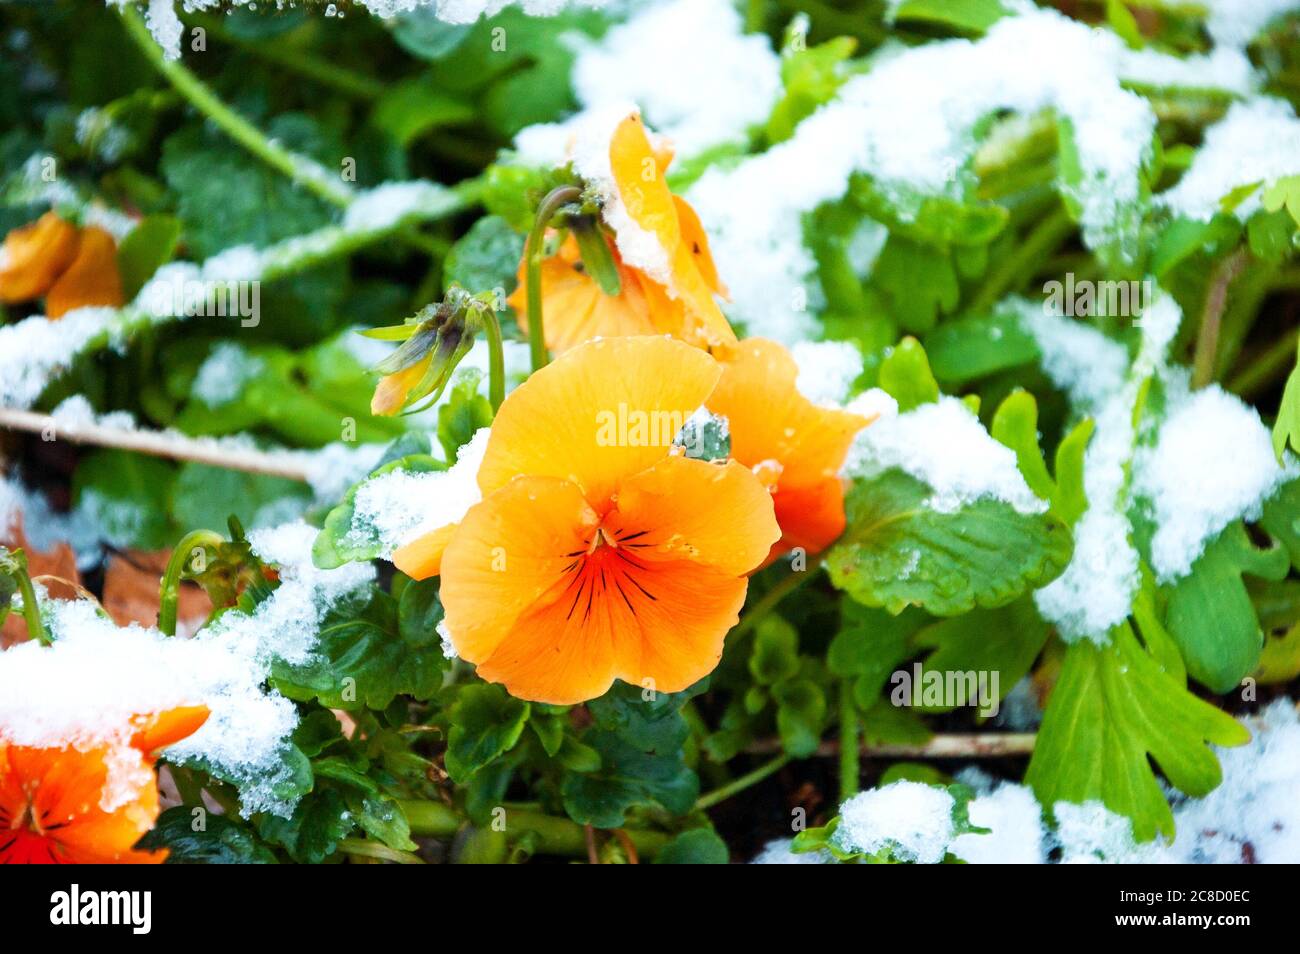 Surprised pansy at flowerbed covered with snow. Sudden winter in spring. Global climate change. Gardening challenge difficulties. Stock Photo